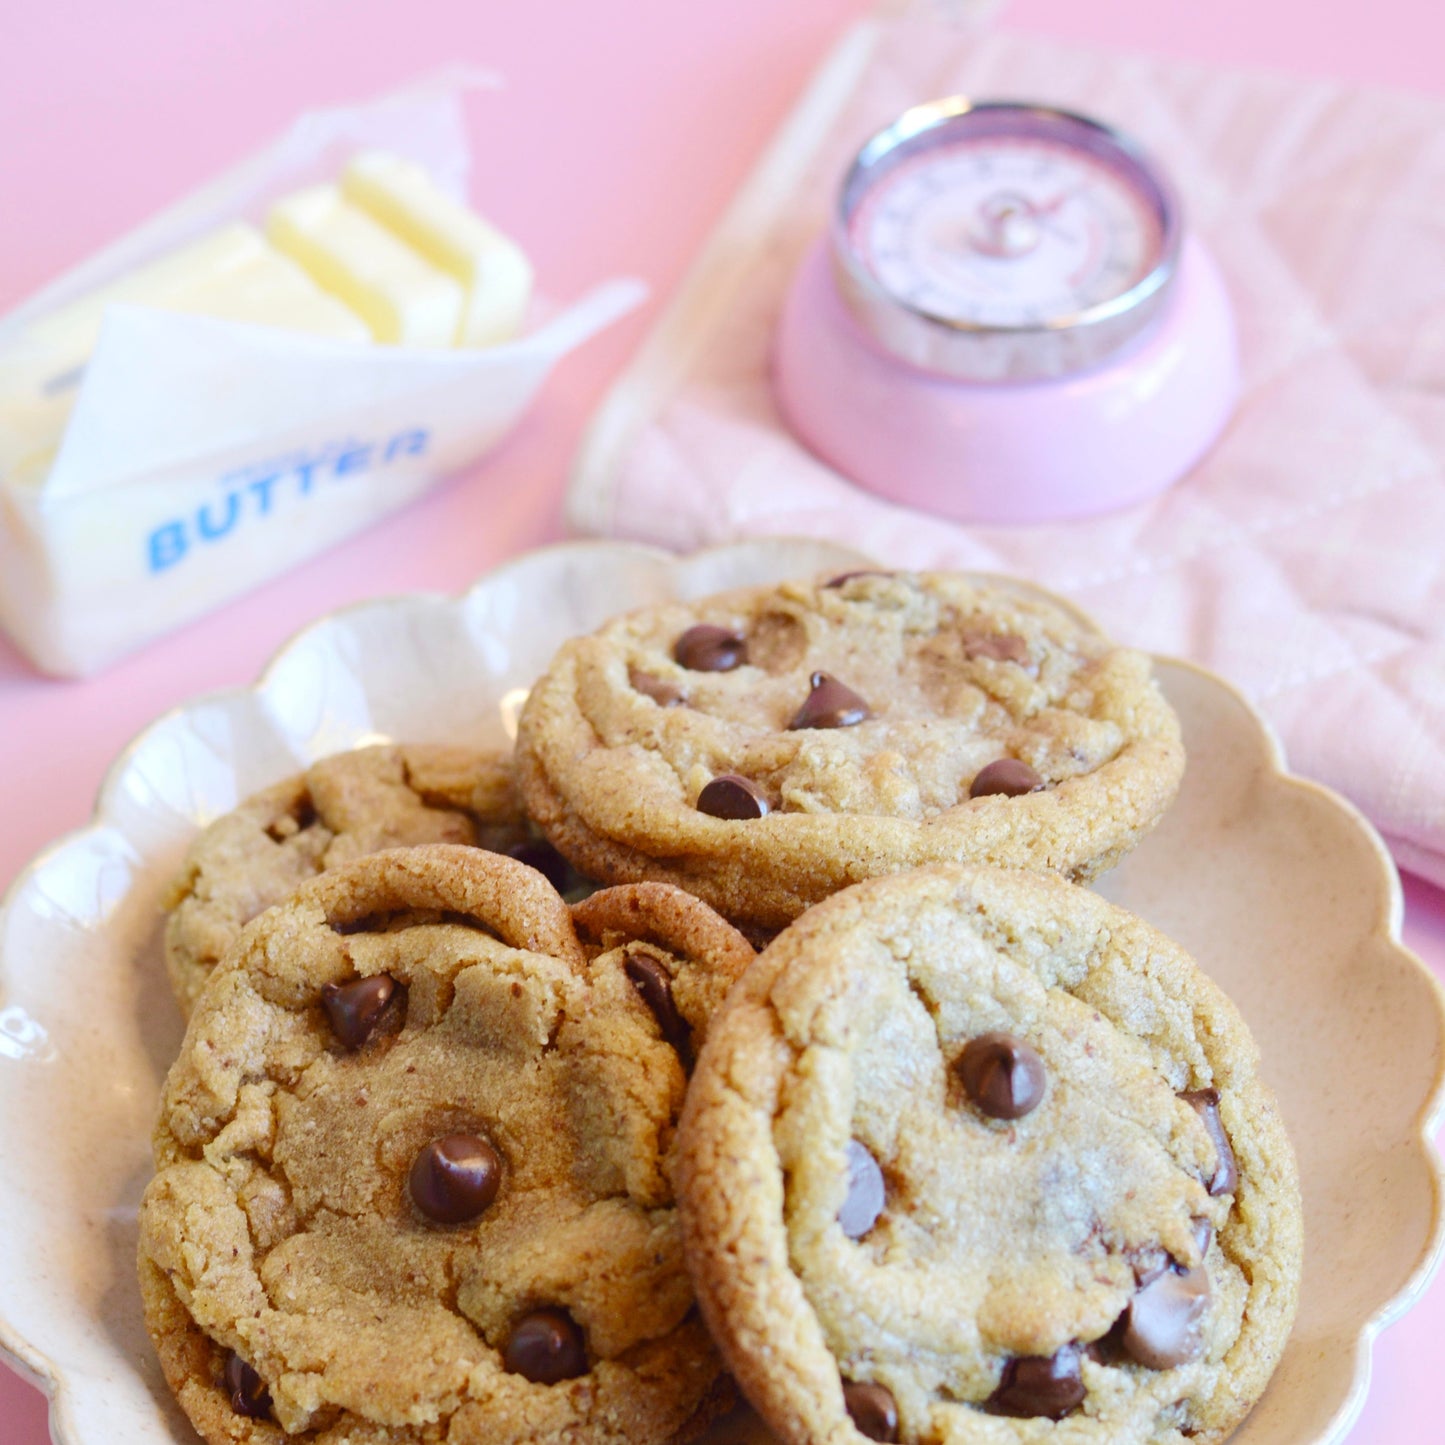 Follow our simple baking instructions for perfect, mouth-watering cookies every time.